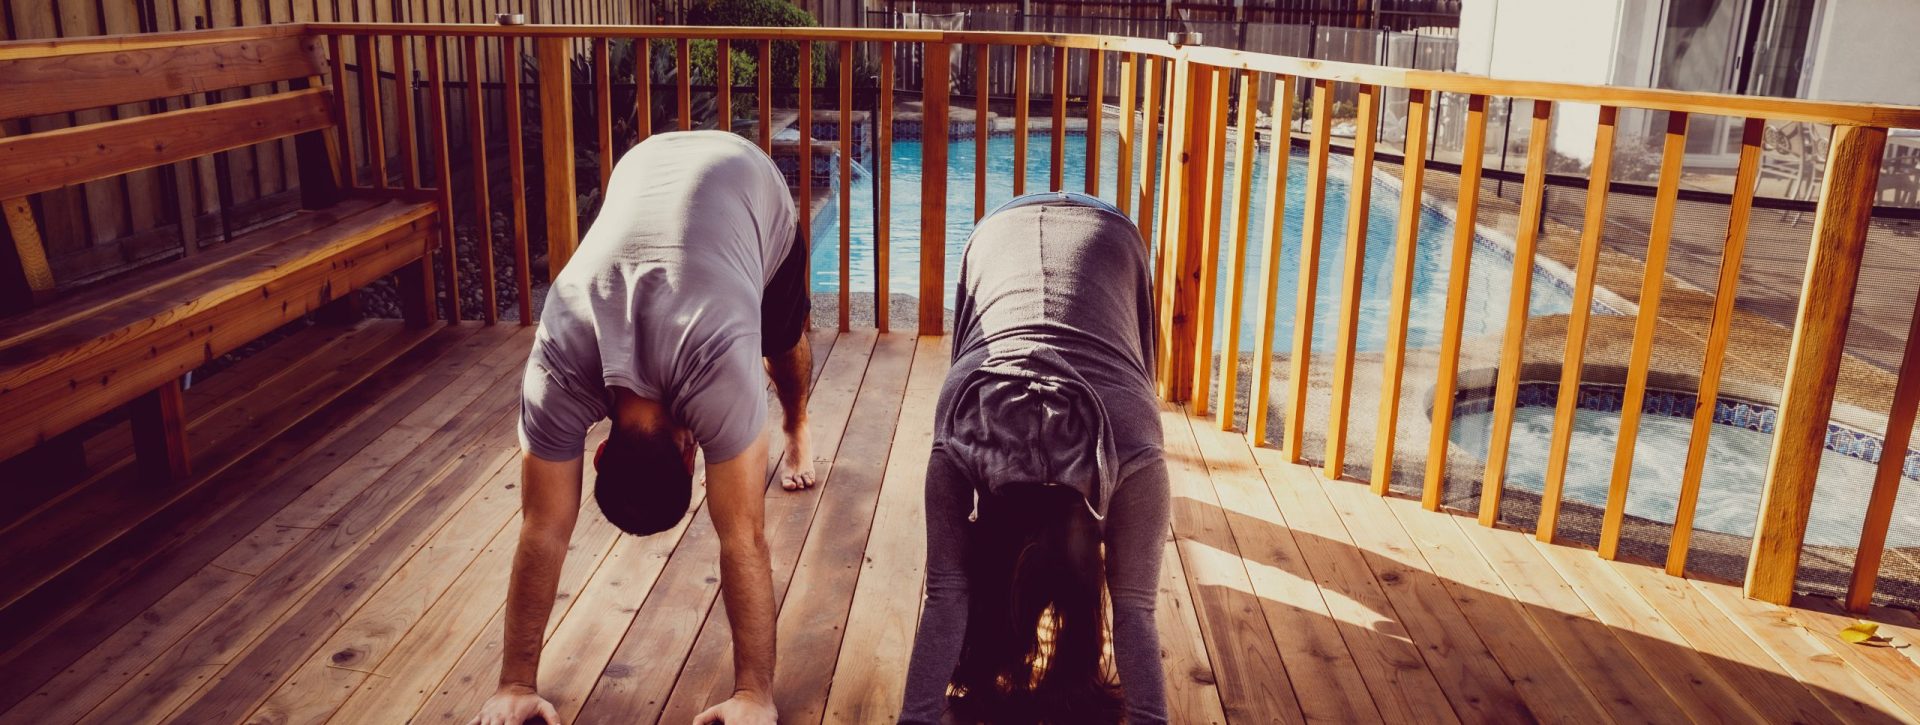 Two people in a downward dog pose while practicing yoga on a deck in front of a pool